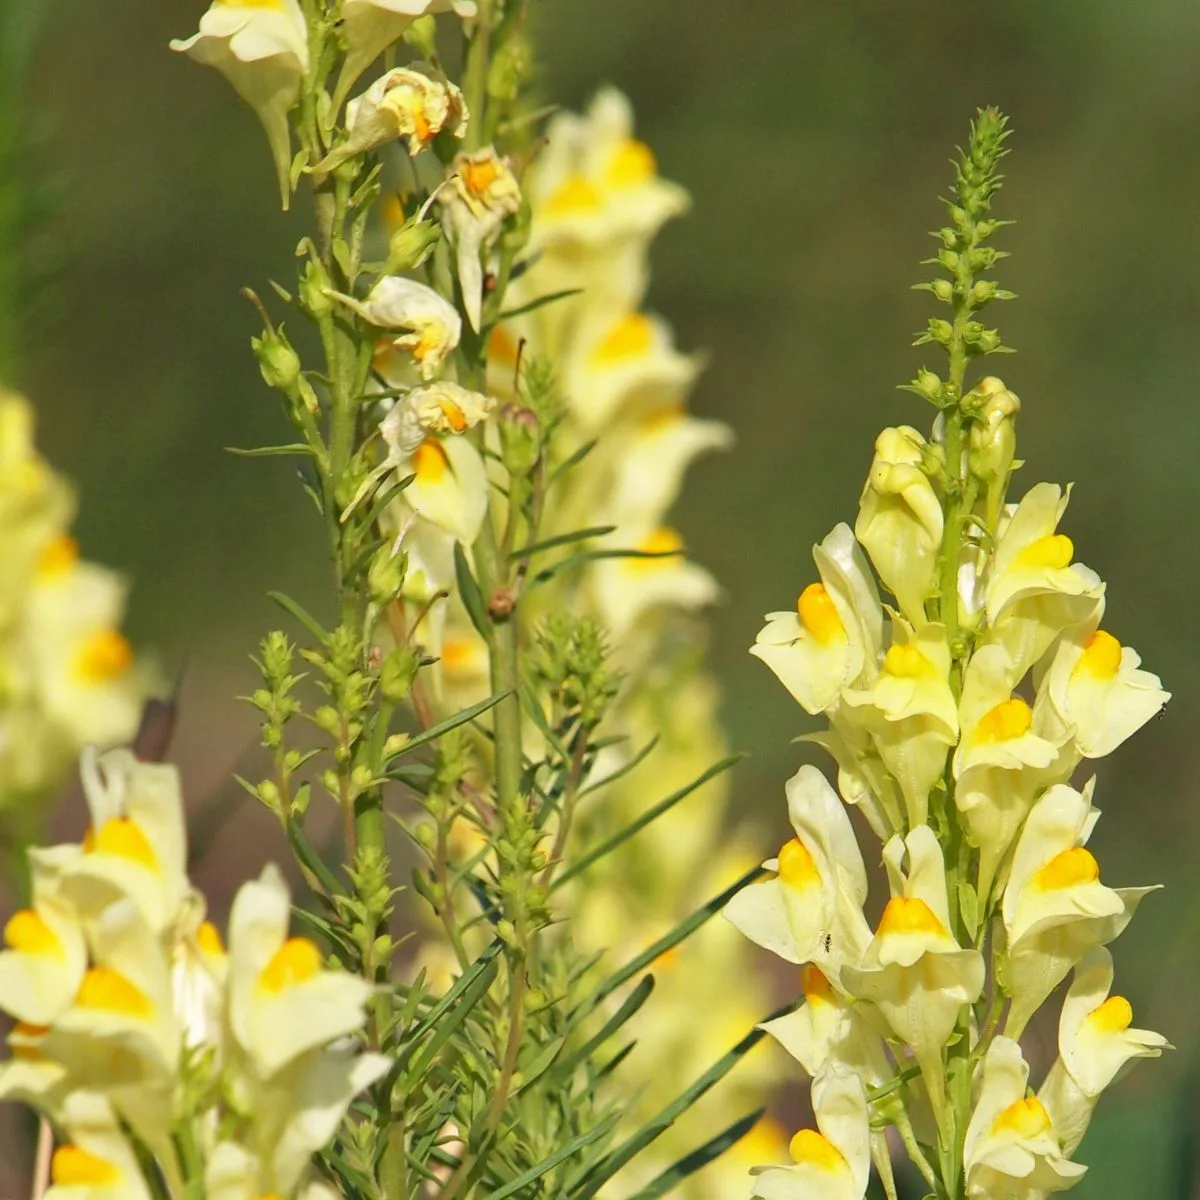 Toadflax flowers.